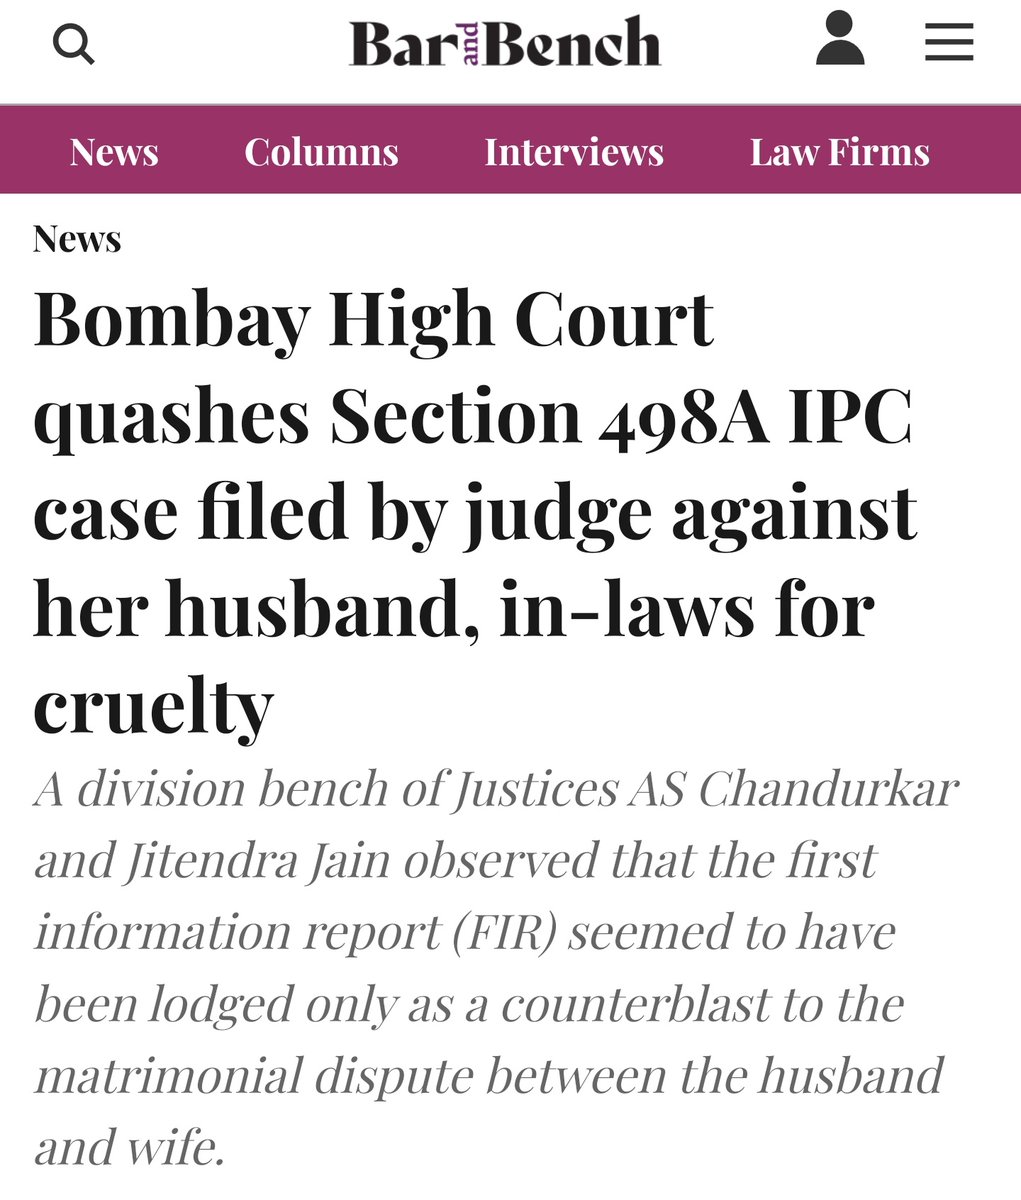 Salute to the courage of the husband for demanding dowry, if he actually did so. Imagine being in his shoe 

barandbench.com/news/bombay-hi…

#ShaadiLaw #GenderBiasedLaws #GenderBias